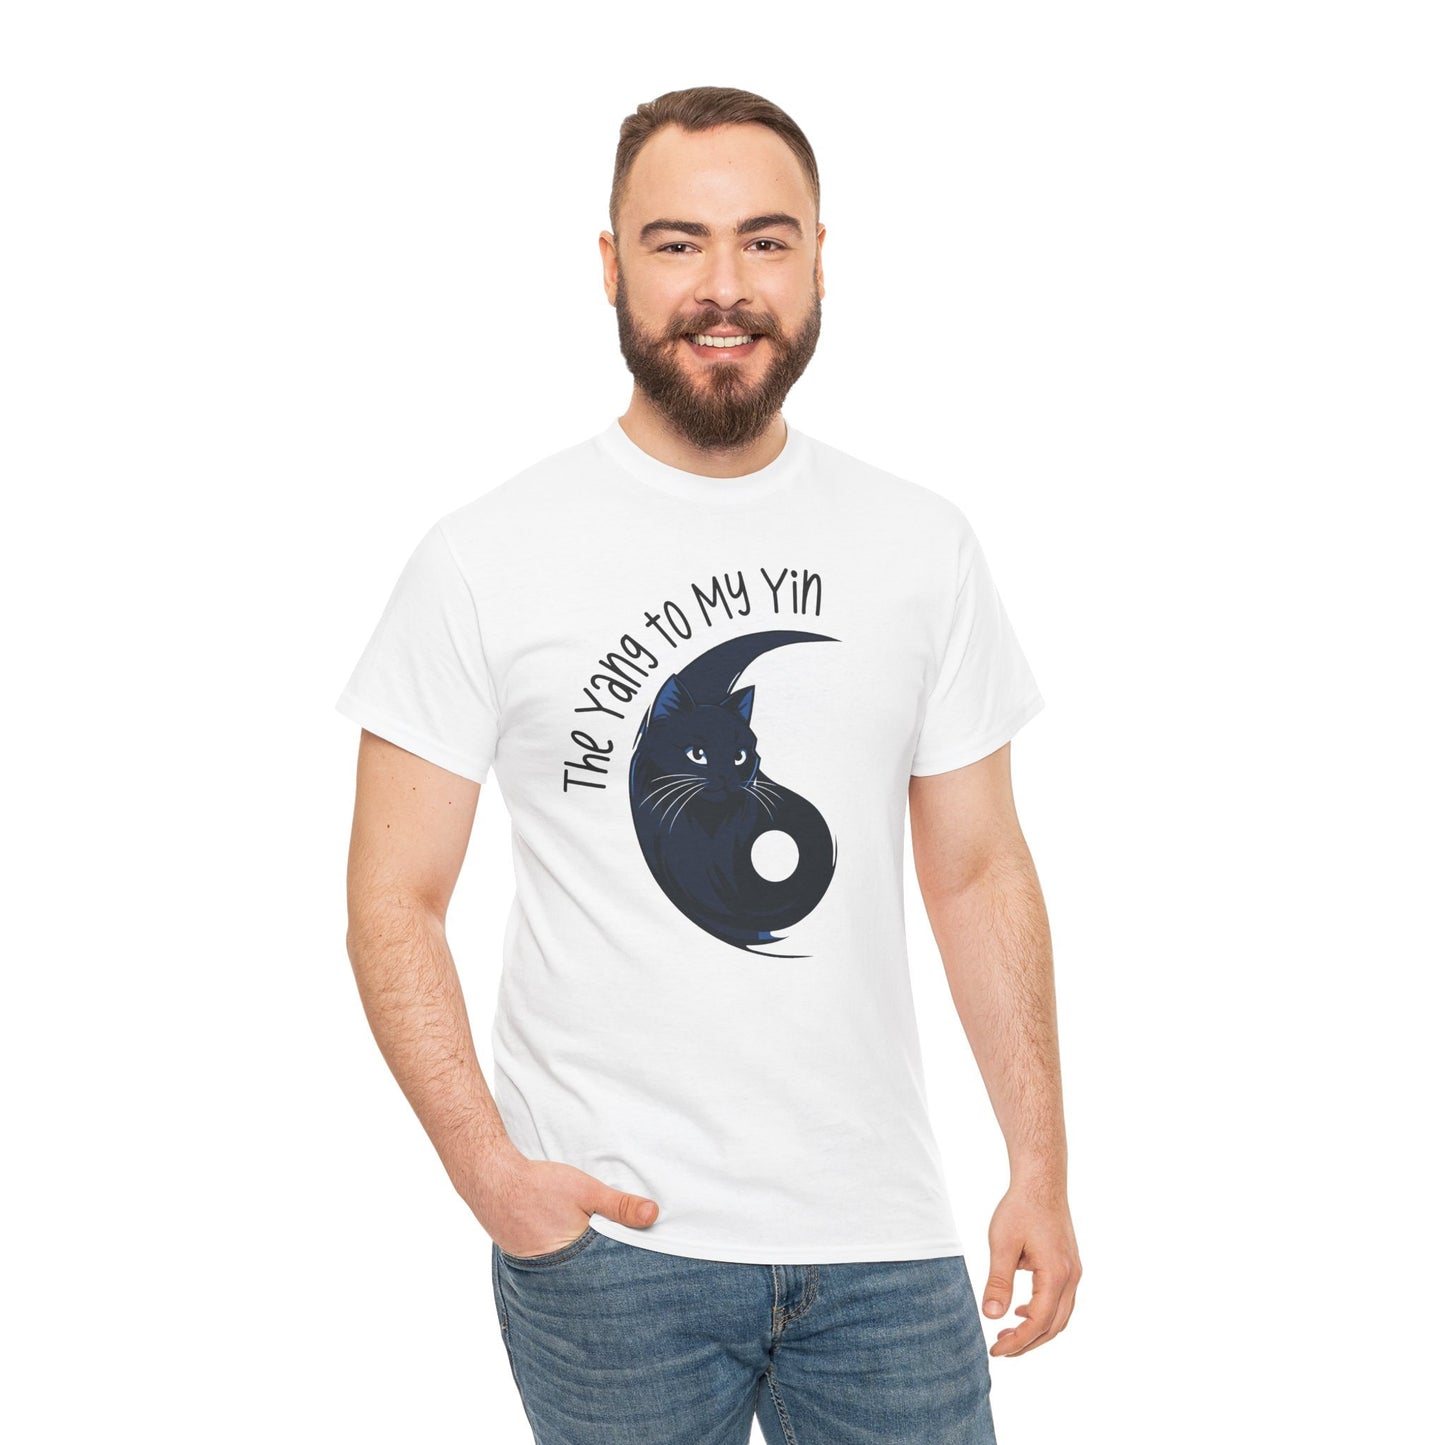 Yin-Yang Matching Shirt, Catlover Couple T-shirt, Cat Yin And Yang, Bestie Matching Shirt, Sweet Kittens Unique Mom and Dad Aesthetic Gift